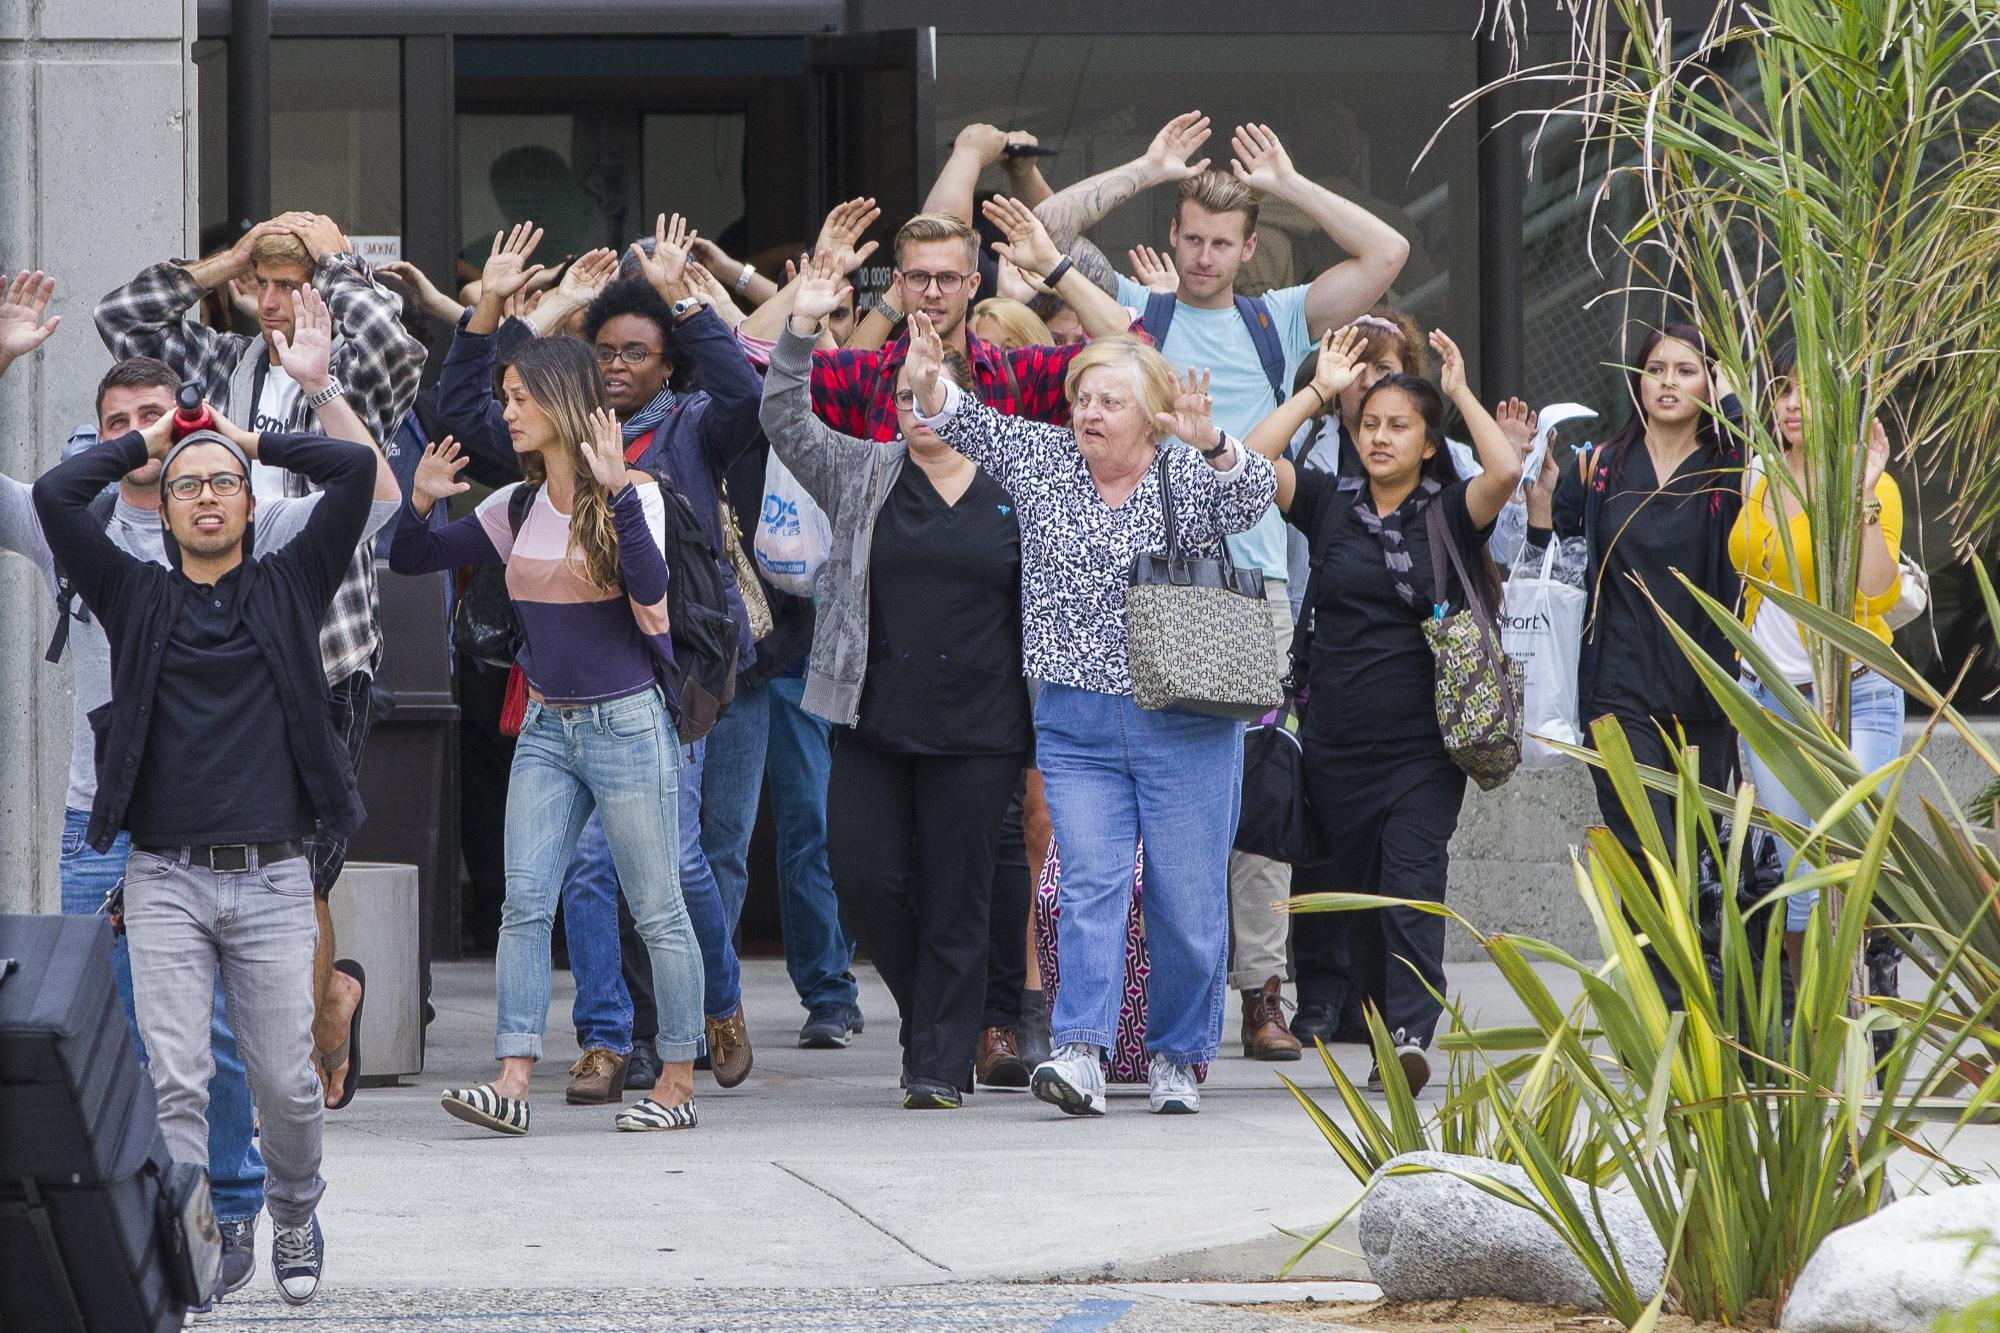  Students are ordered to evacute from the Business Building with their hands in the air while officers direct riffles in their direction to secure the scene during a school shooting on June 7, 2013 at Santa Monica College in Santa Monica, California.